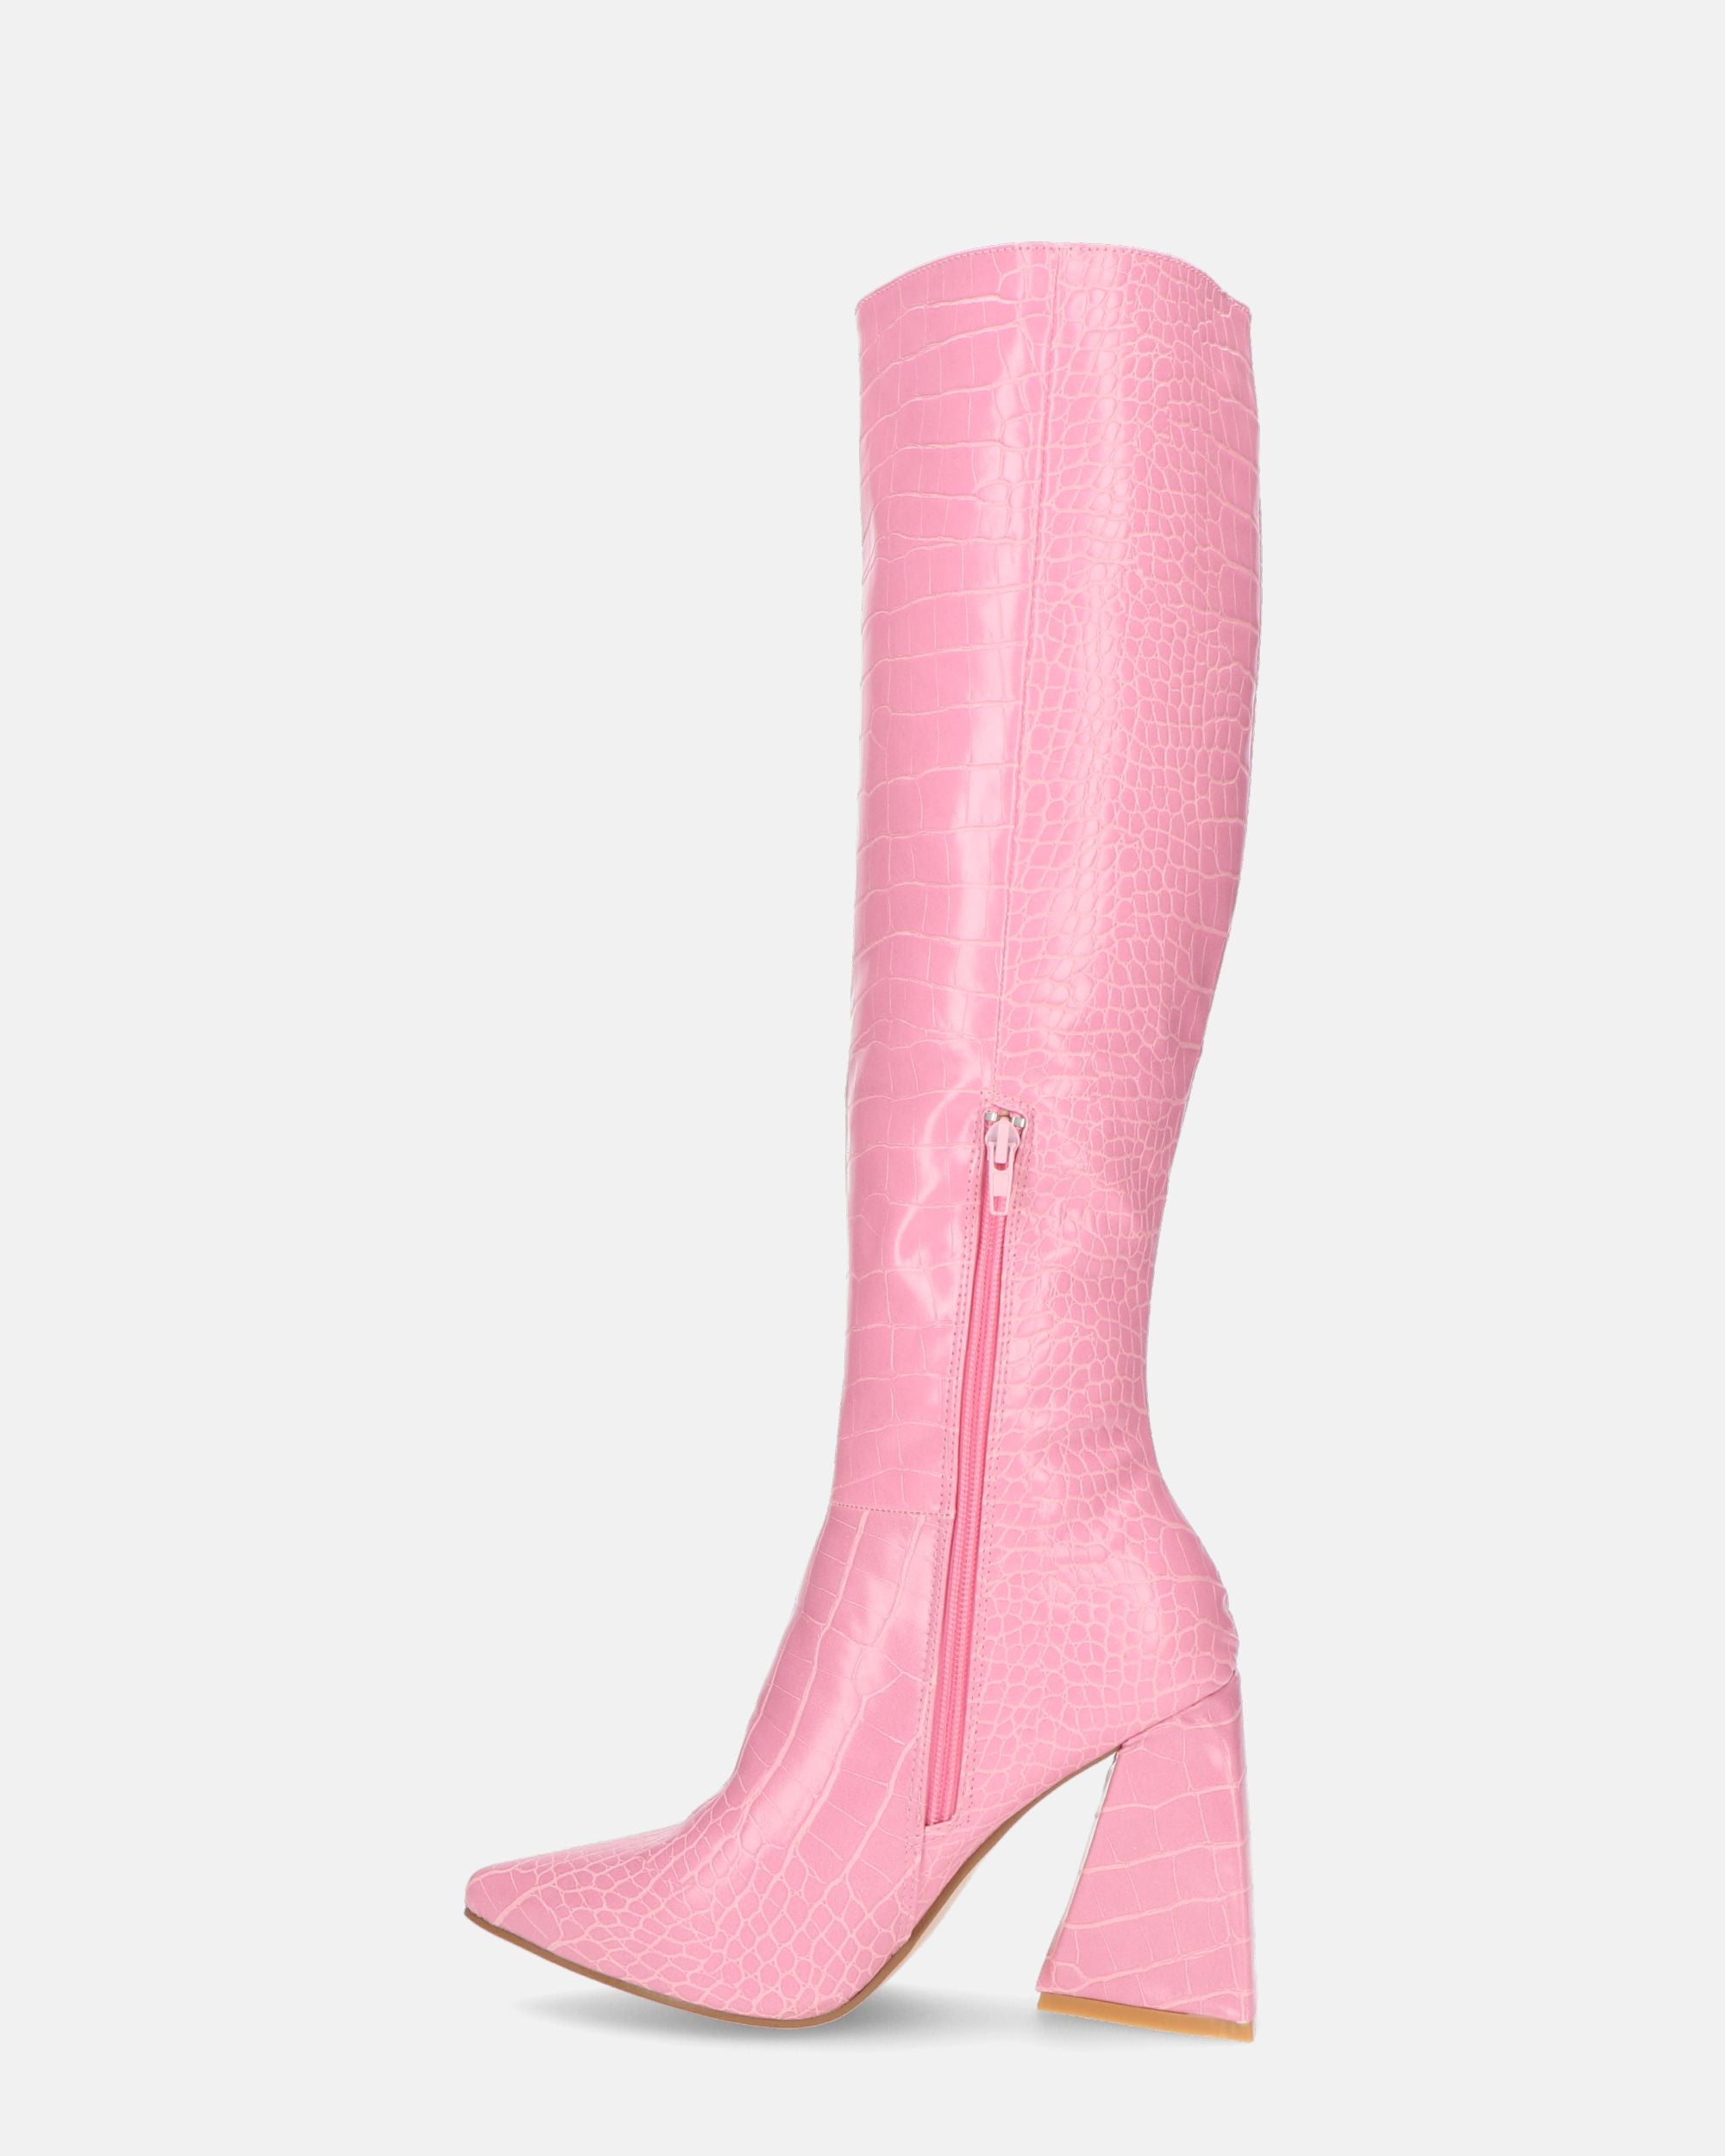 TRUDY - long boots with high heels in pink PU with croc print